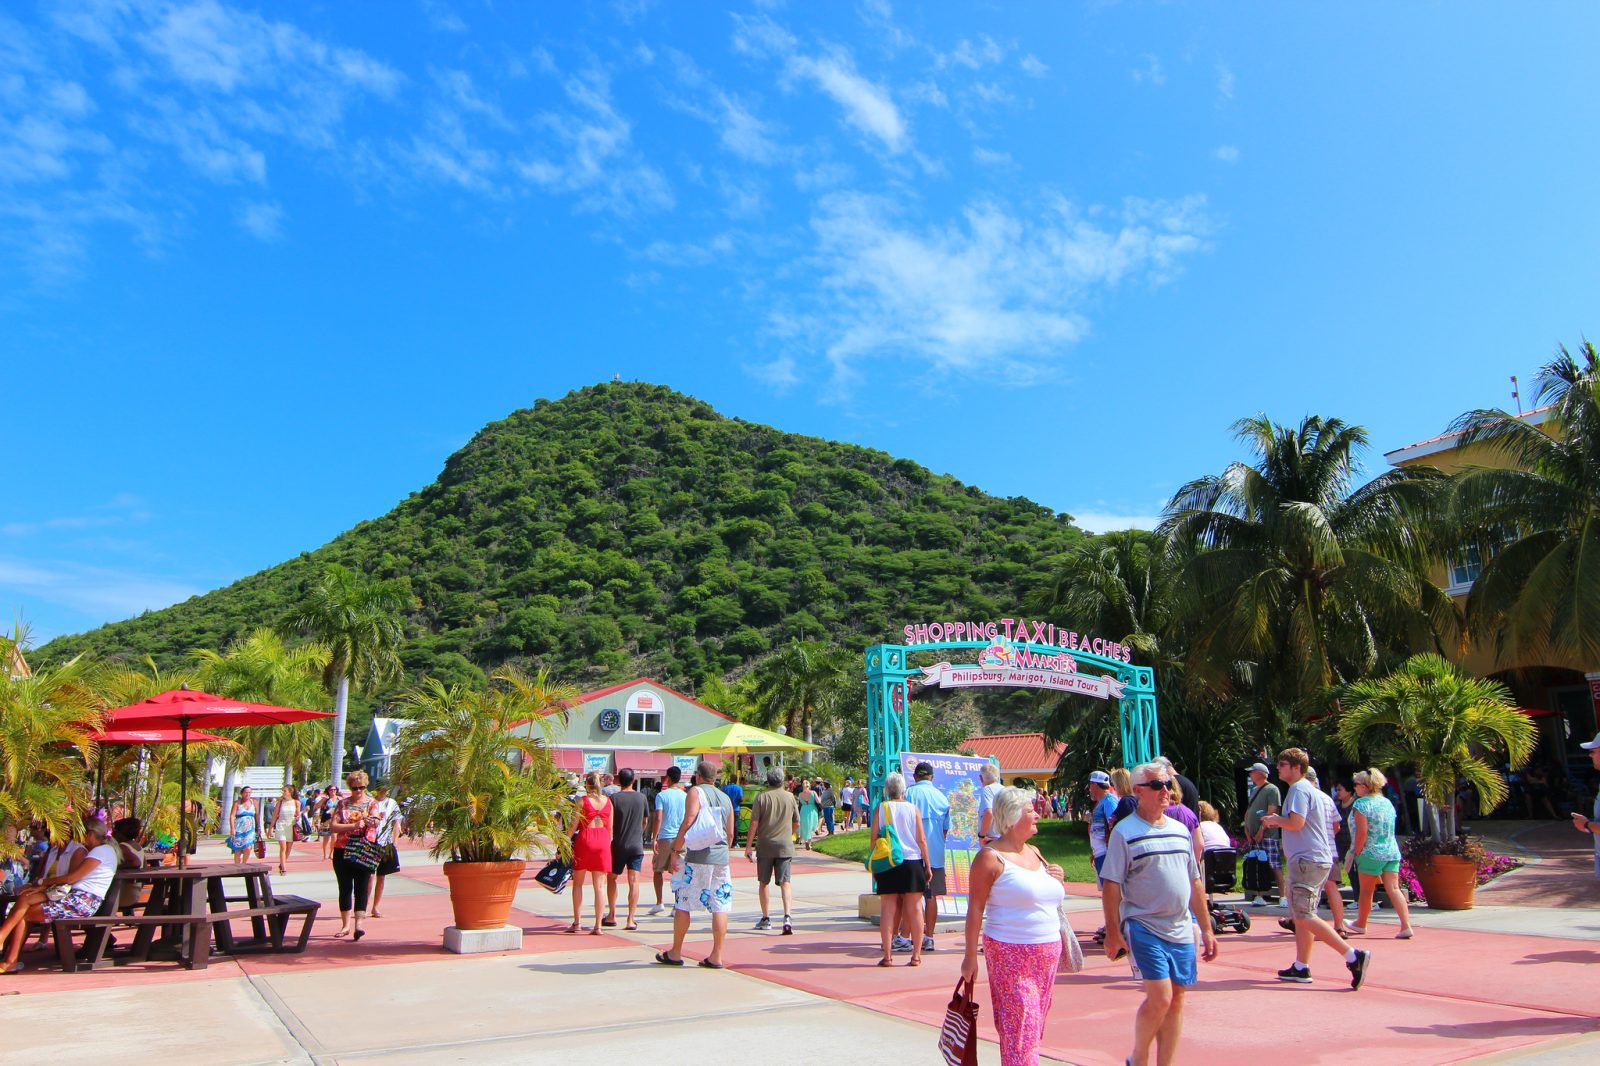 St marteen tours and taxi transfers